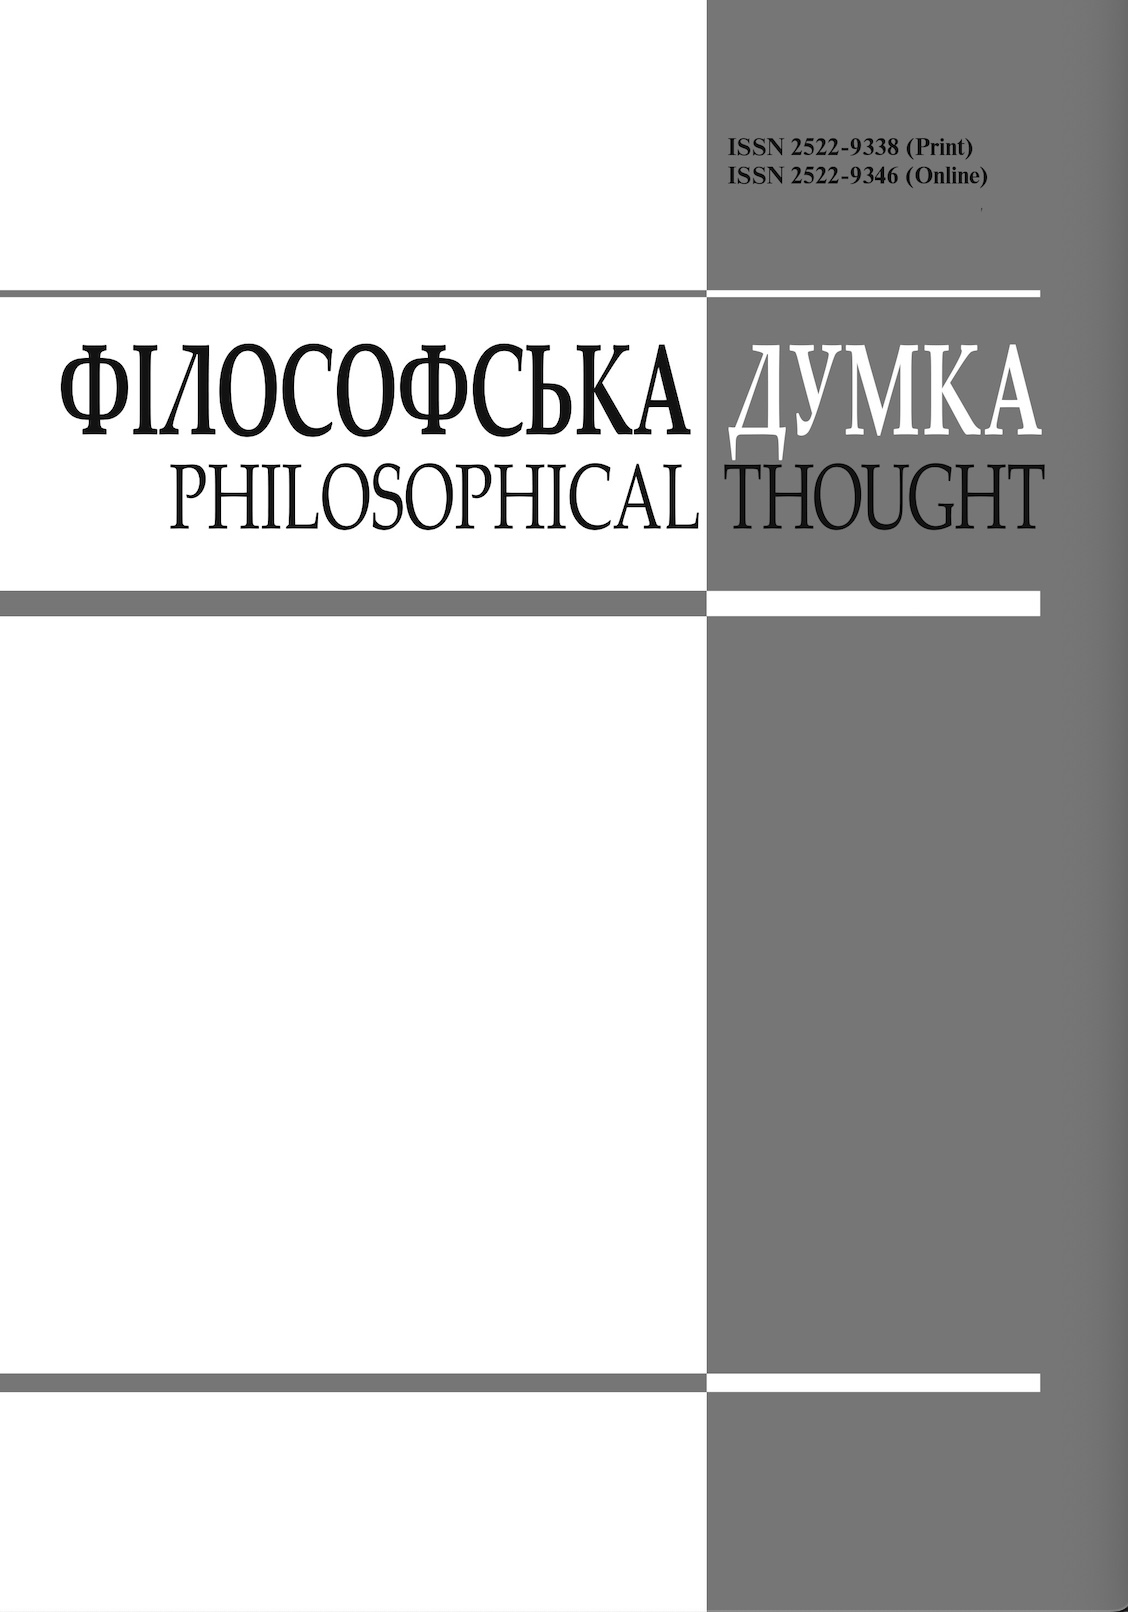 					View No. 6 (2014): PHILOSOPHICAL THOUGHT
				